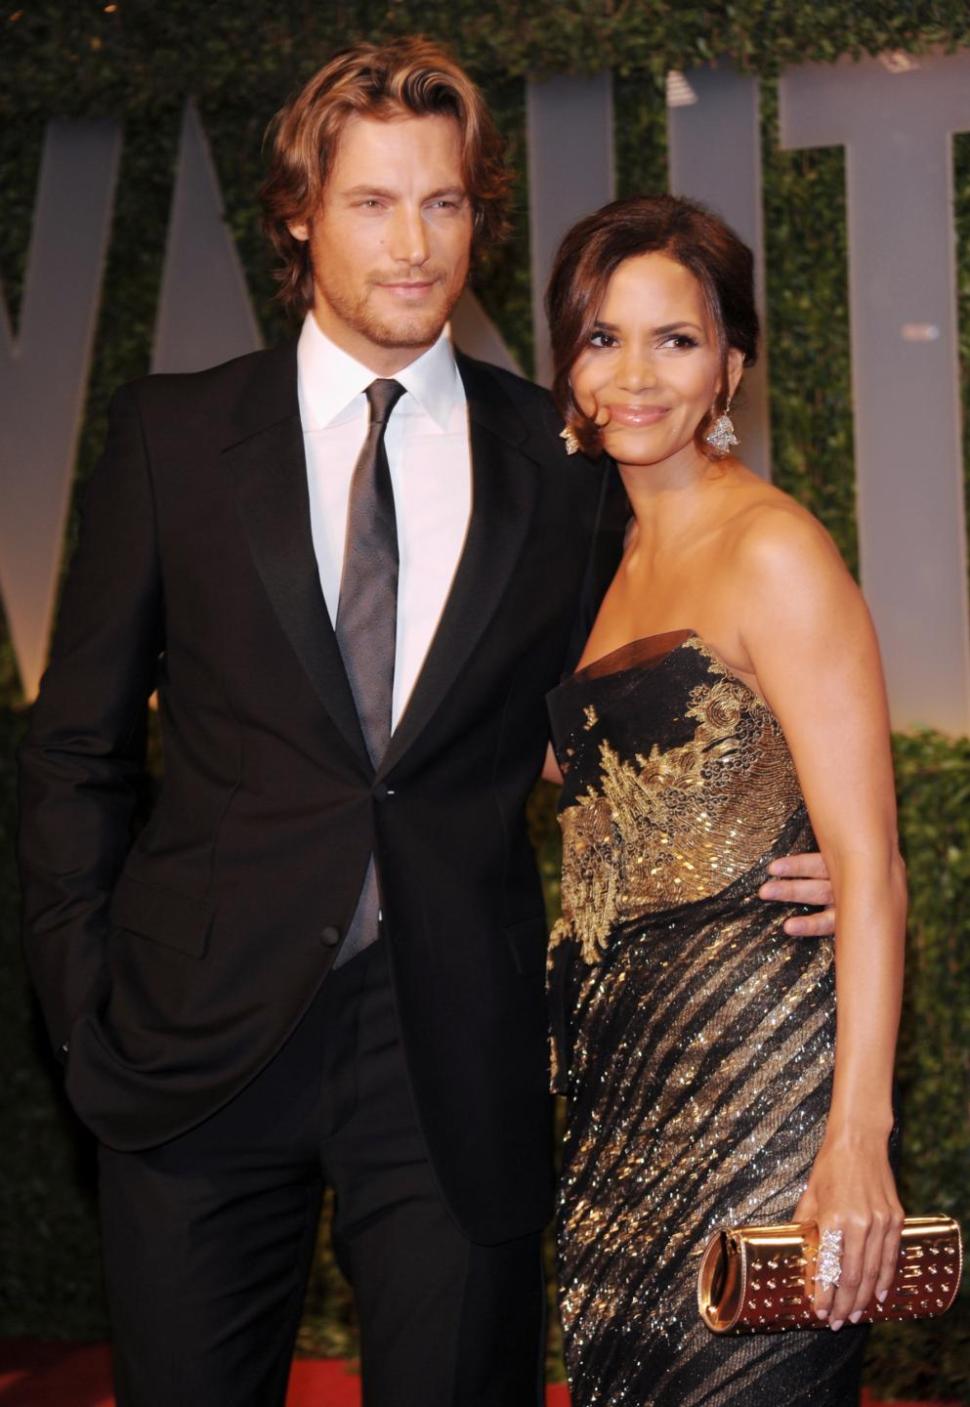 Halle Berry, right, and Gabriel Aubry at the Vanity Fair Oscar party in West Hollywood in 2009.